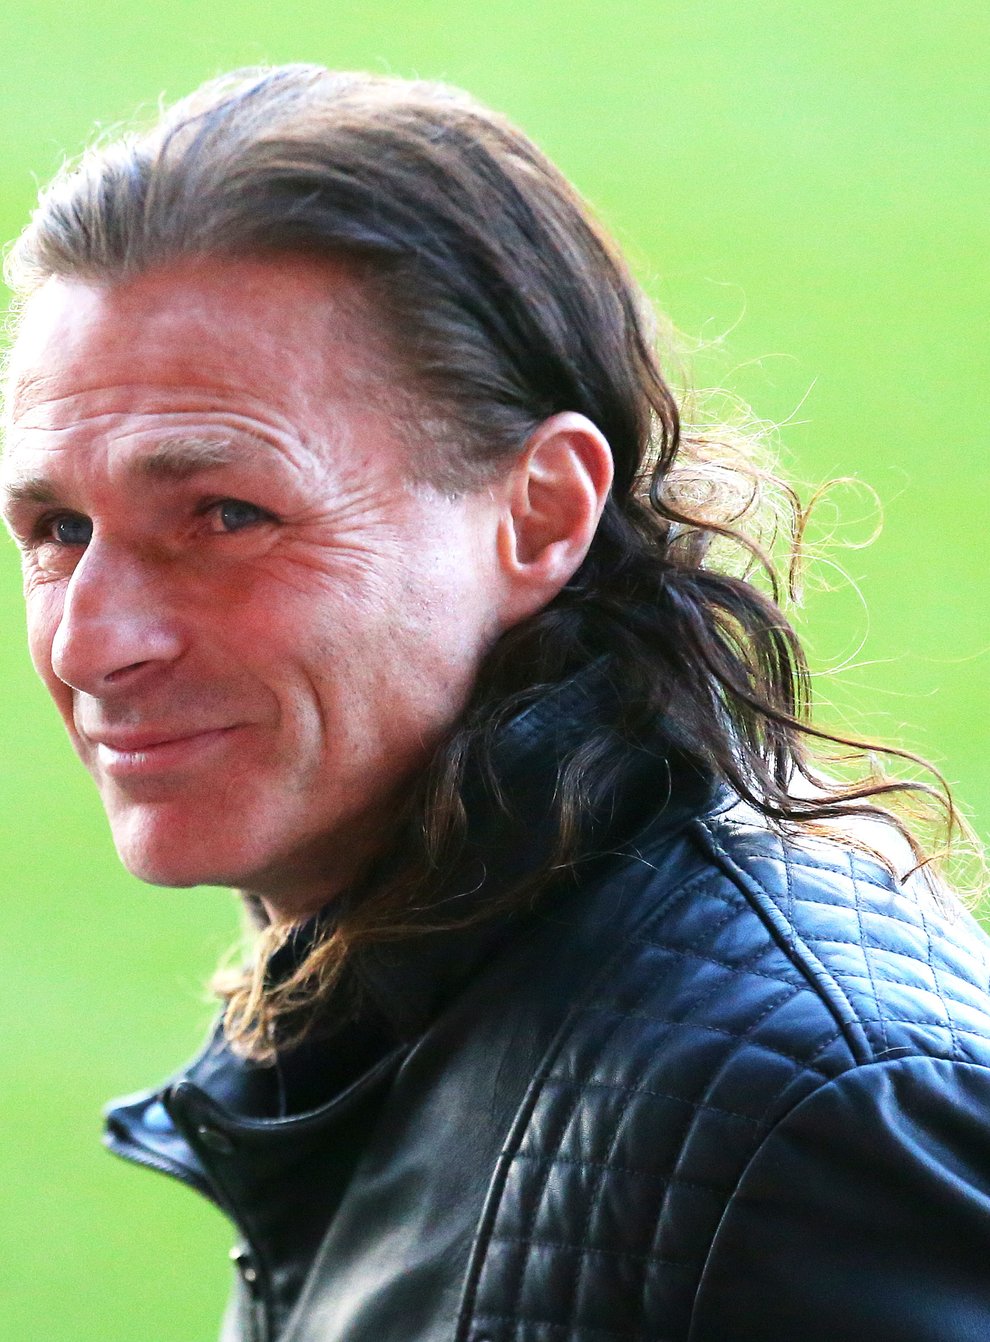 Gareth Ainsworth was delighted to see his side go top (Tim Markland/PA)